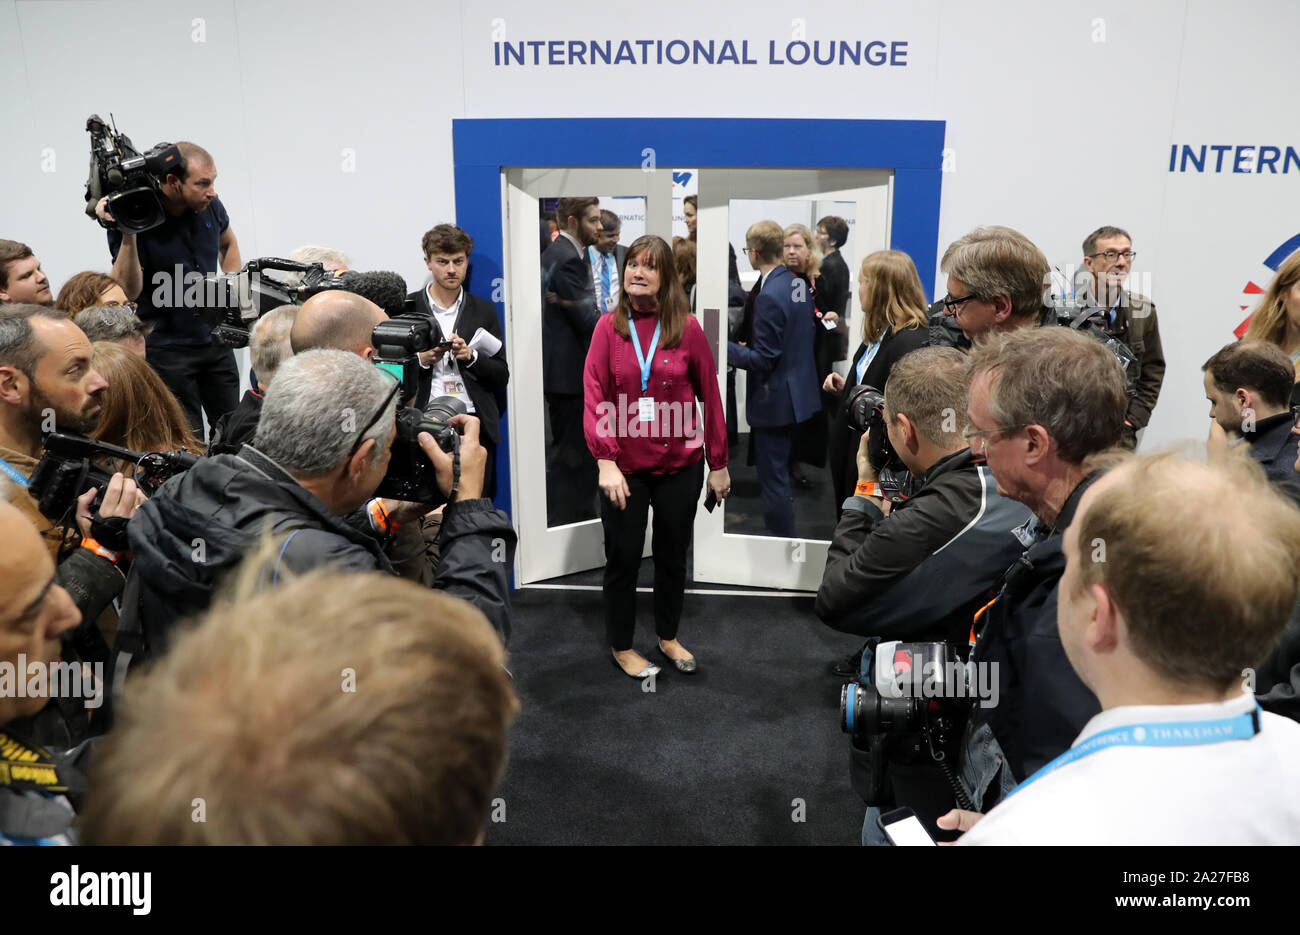 SECURITY INCIDENT AT THE INTERNATIONAL LOUNGE, 2019 Stock Photo